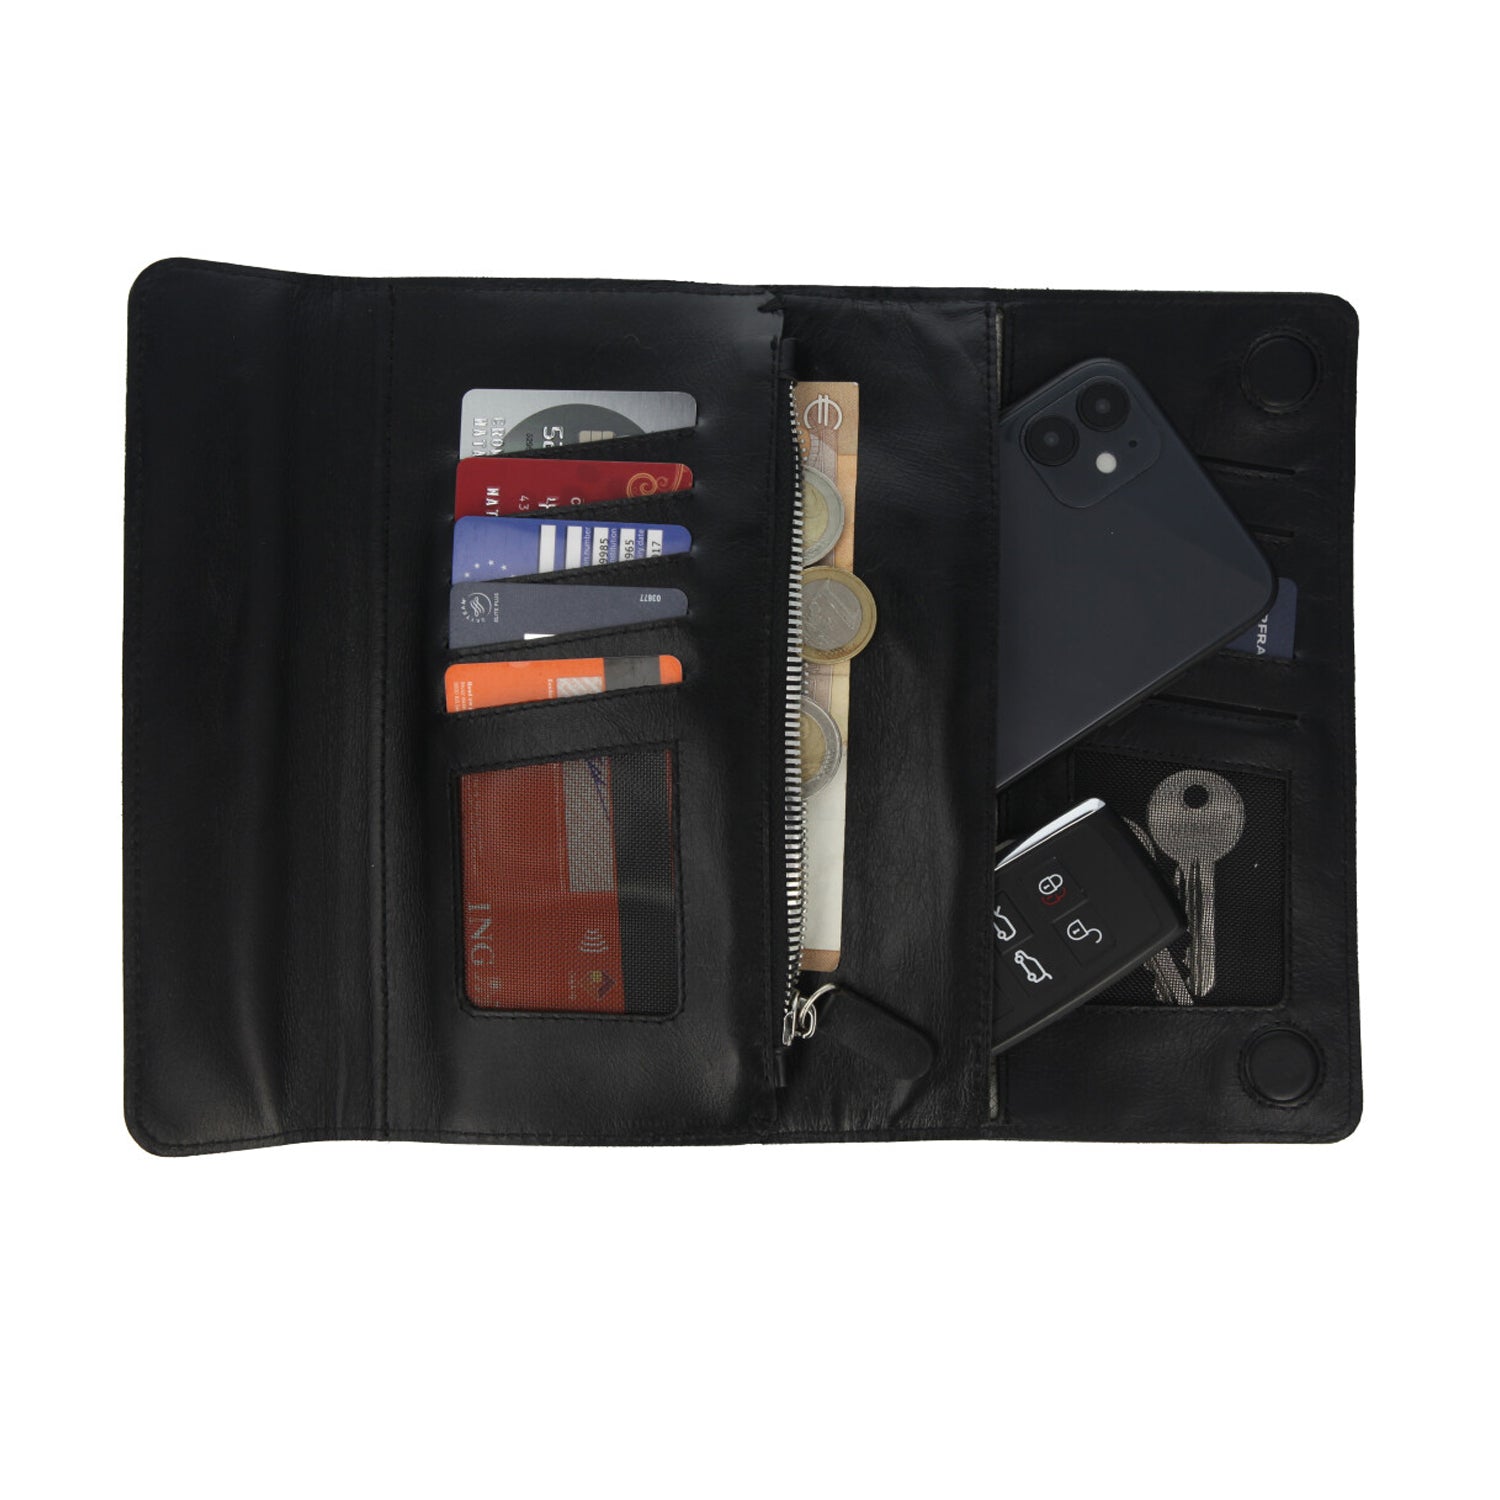 Bag Faraday Phone Wallet Luxe Leather Black